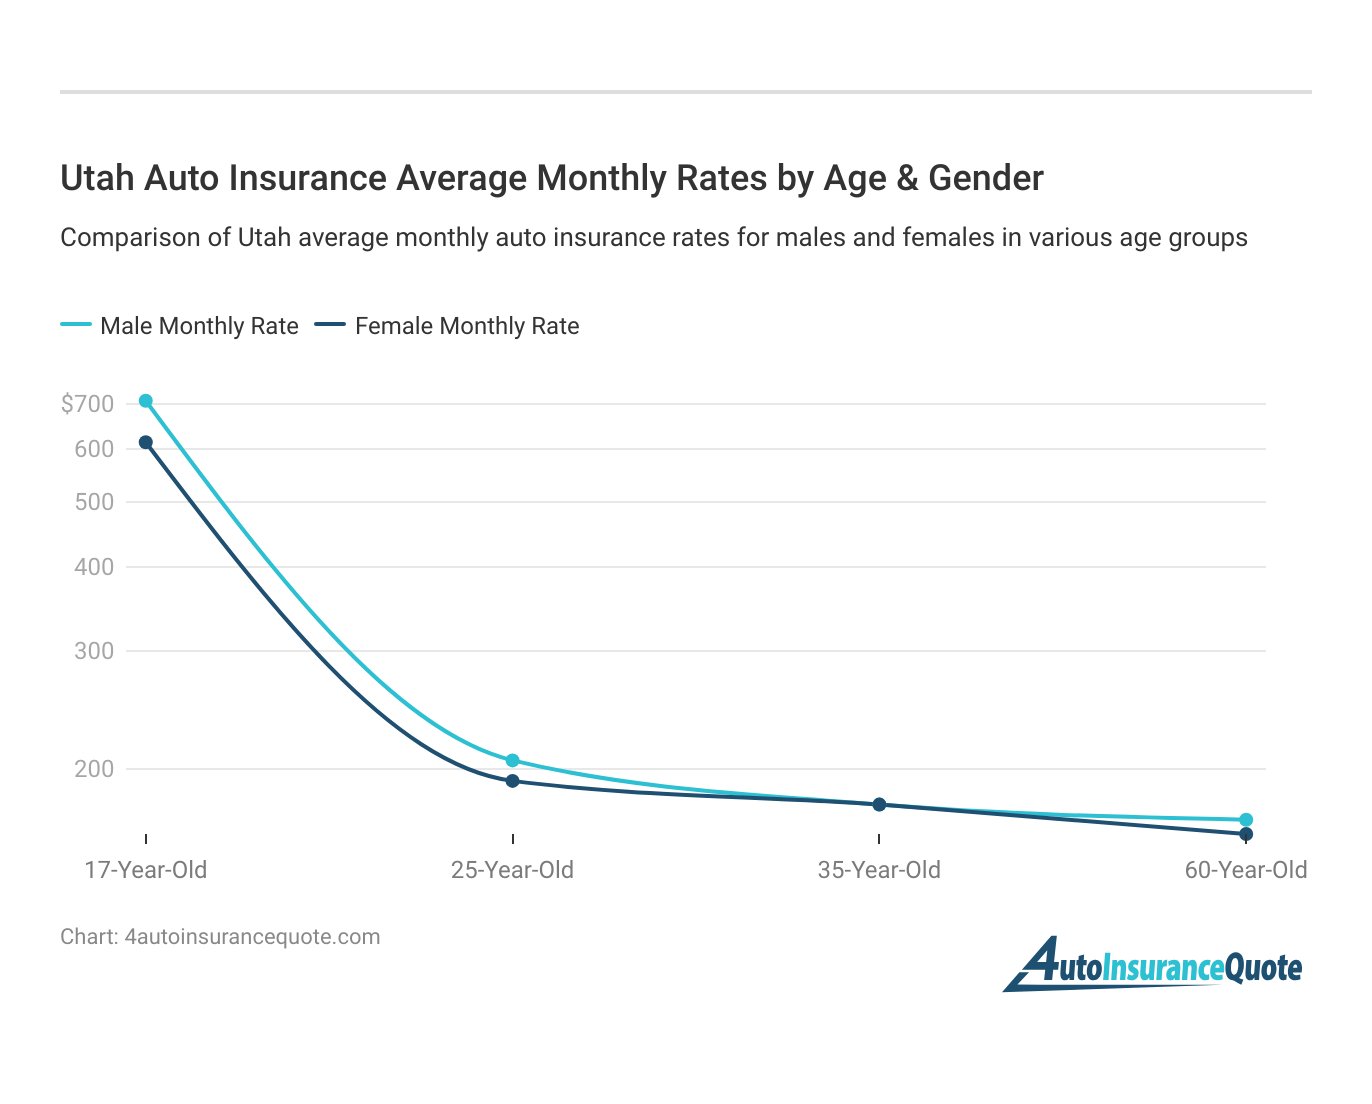 <h3>Utah Auto Insurance Average Monthly Rates by Age & Gender</h3>